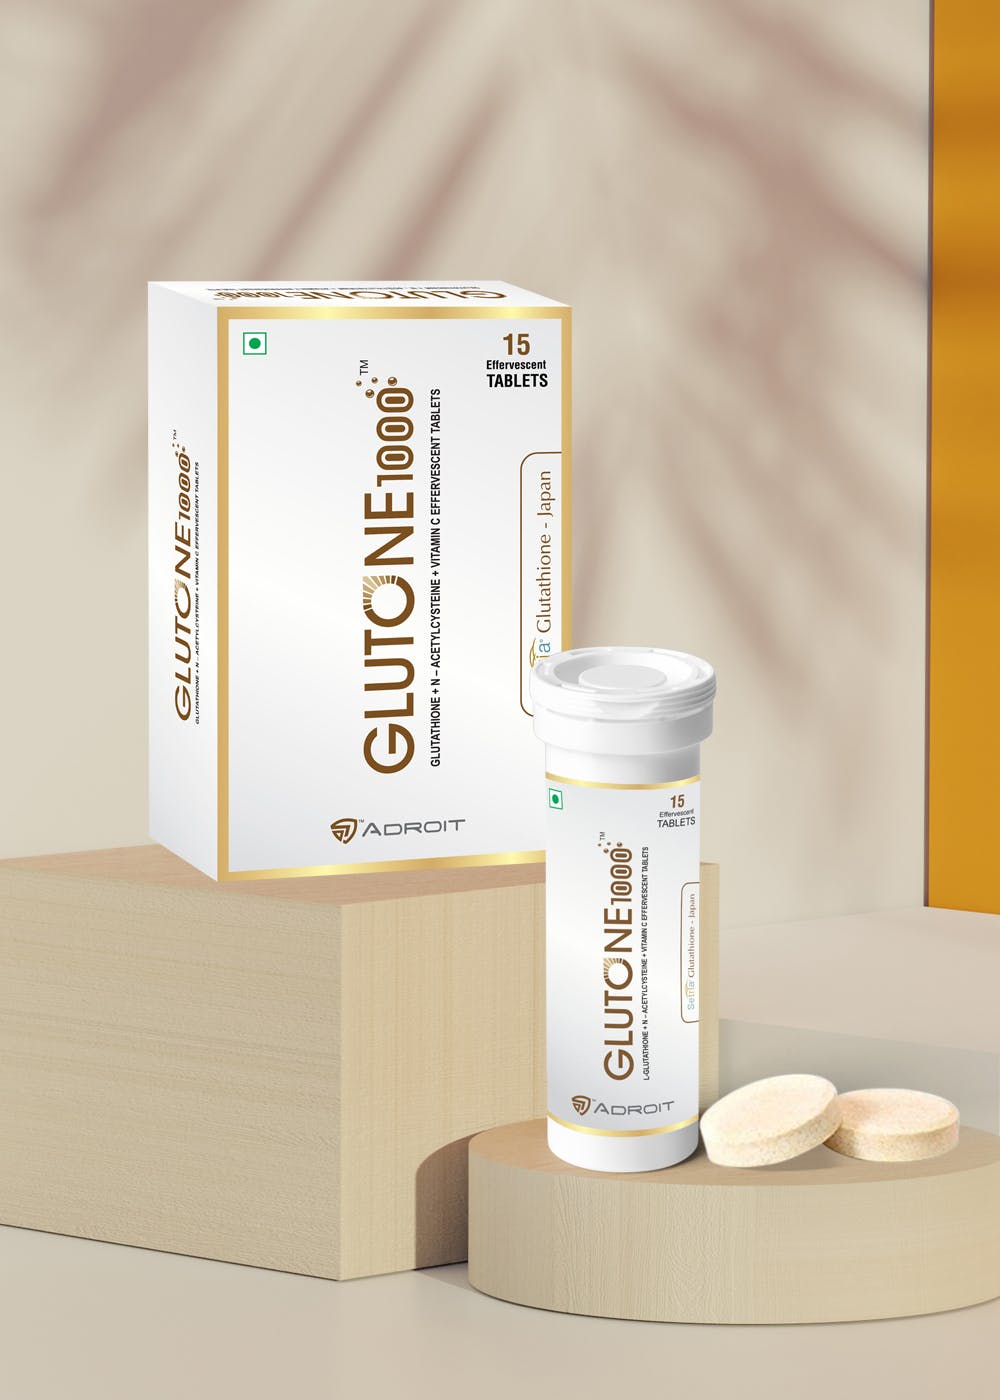 L-Glutathione & Vitamin C Effervescent Tablets for Glowing and Radiant Skin (Orange flavour)